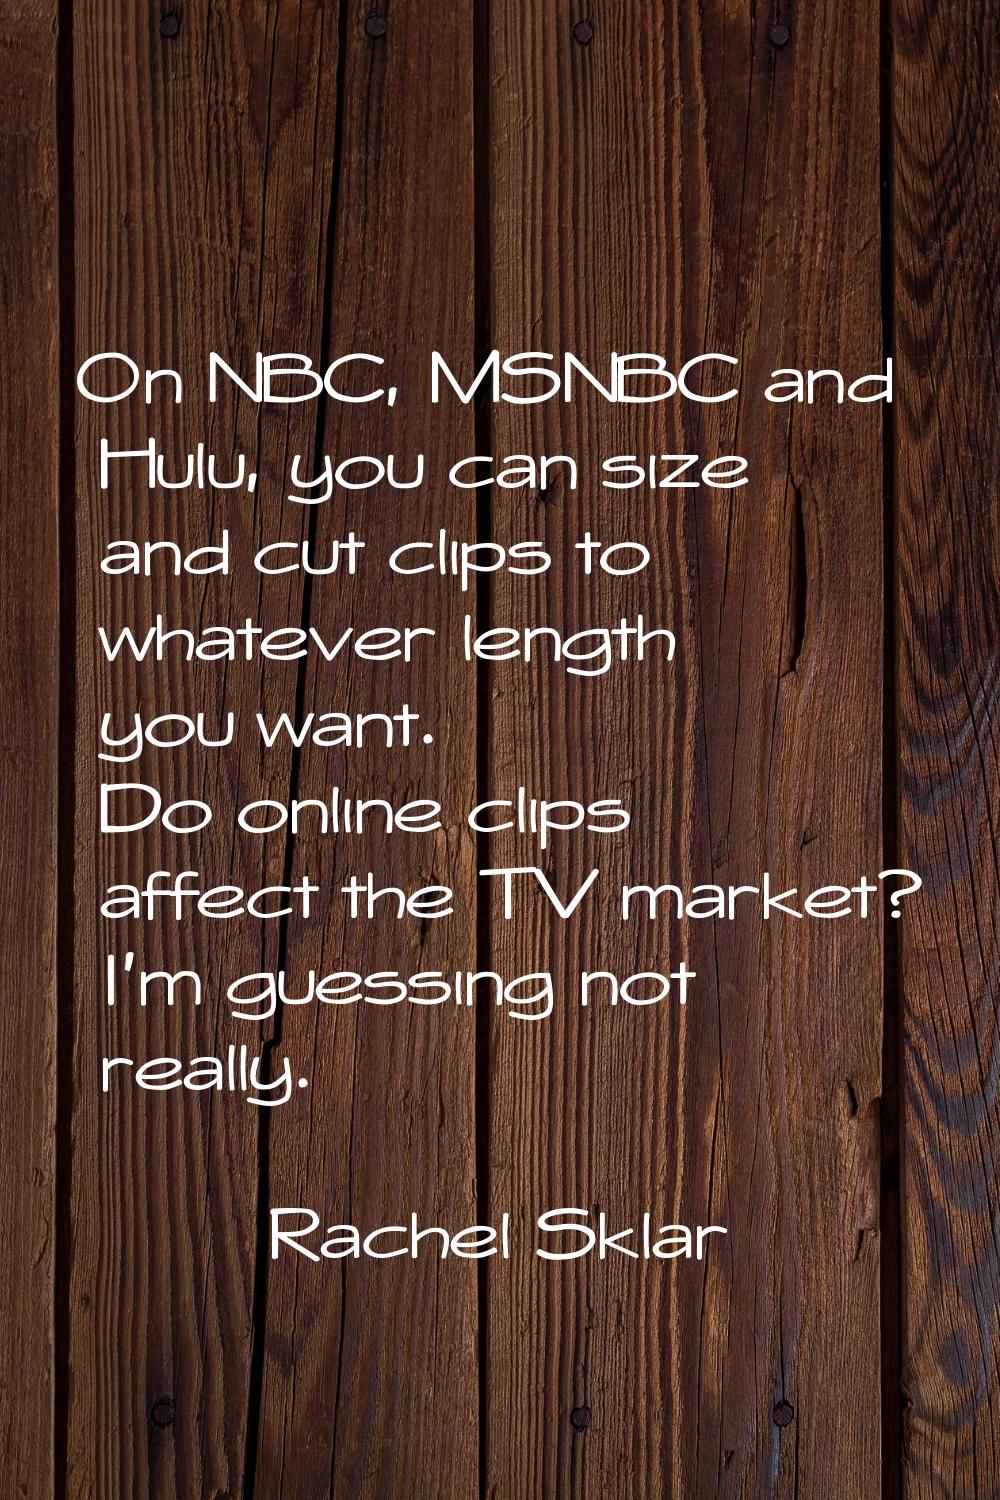 On NBC, MSNBC and Hulu, you can size and cut clips to whatever length you want. Do online clips aff